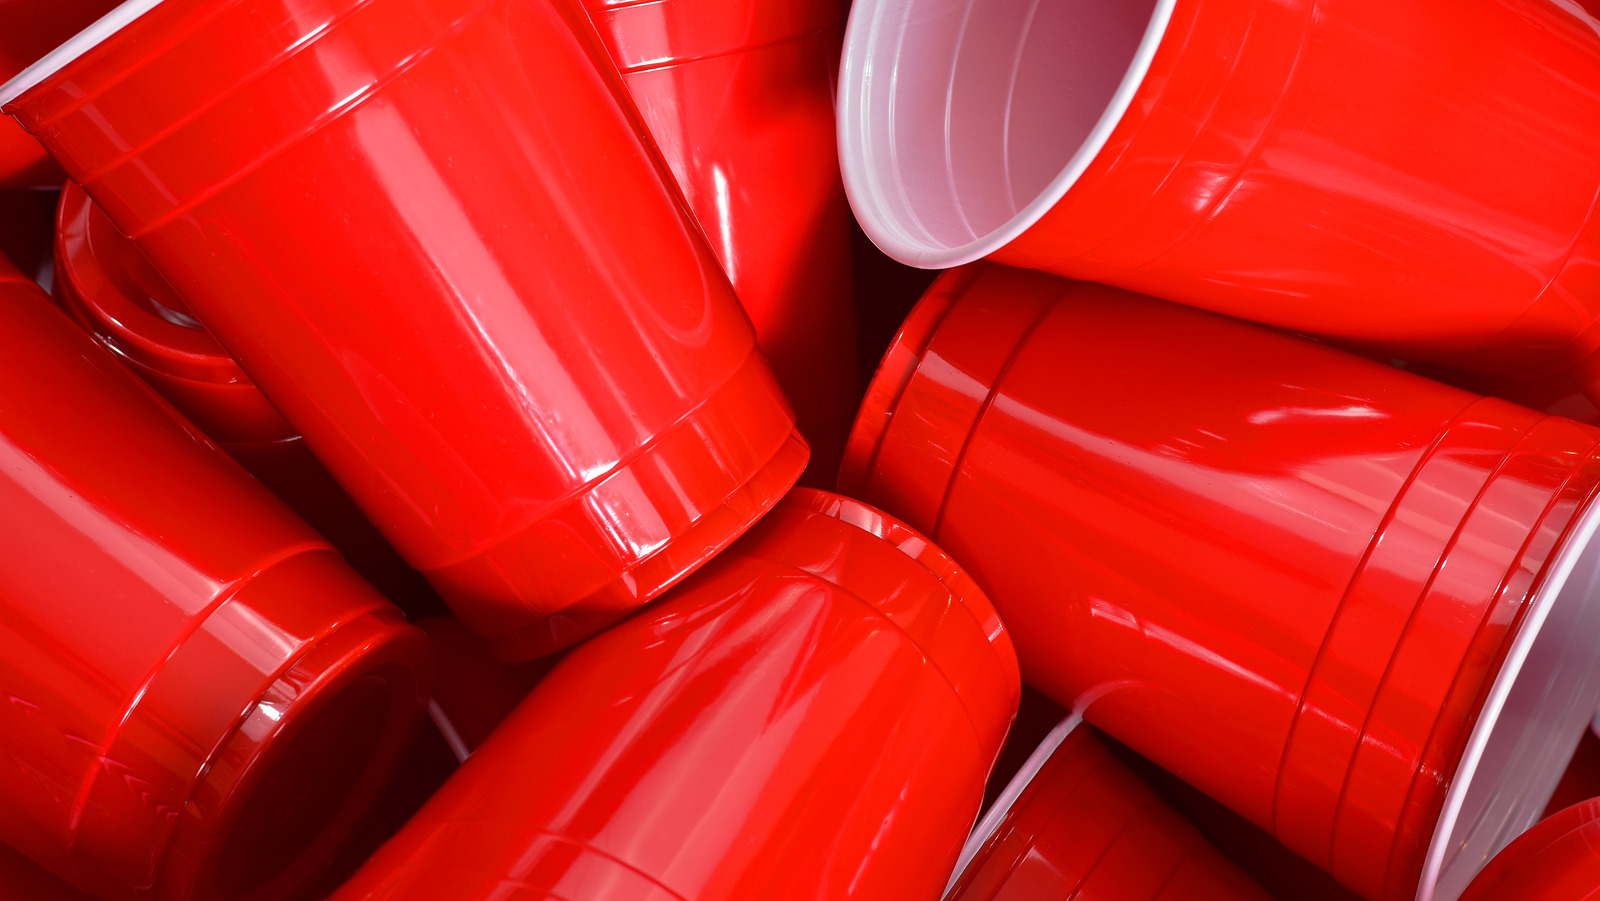 True Red Party Cups, Disposable Cups, Drink Cups For Cocktails And